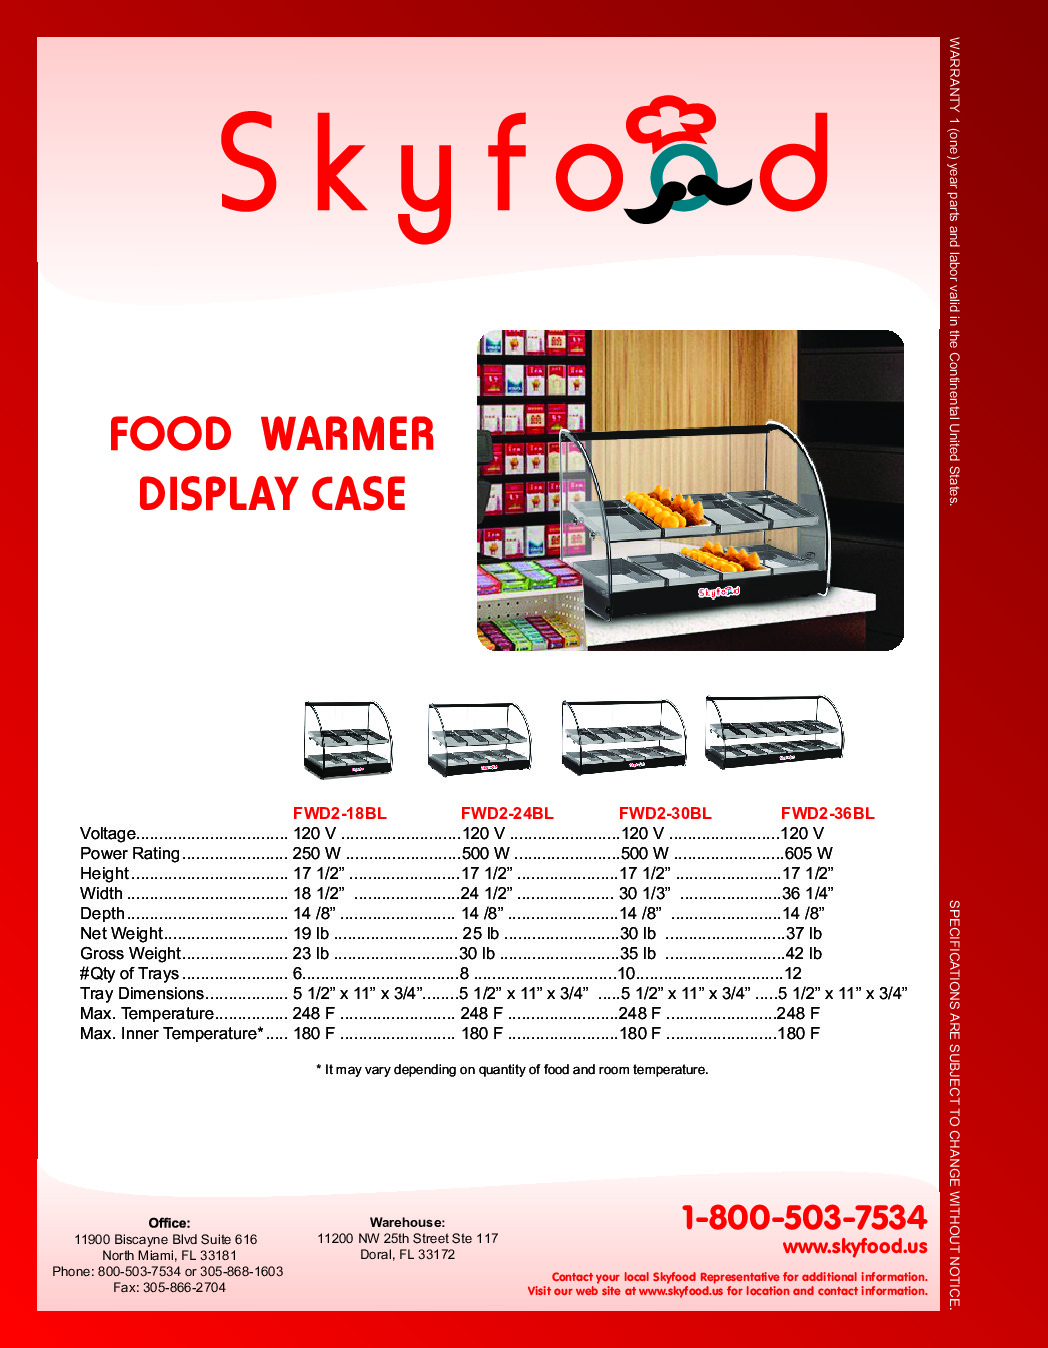 Skyfood FWD2-36BL Countertop Heated Deli Display Case